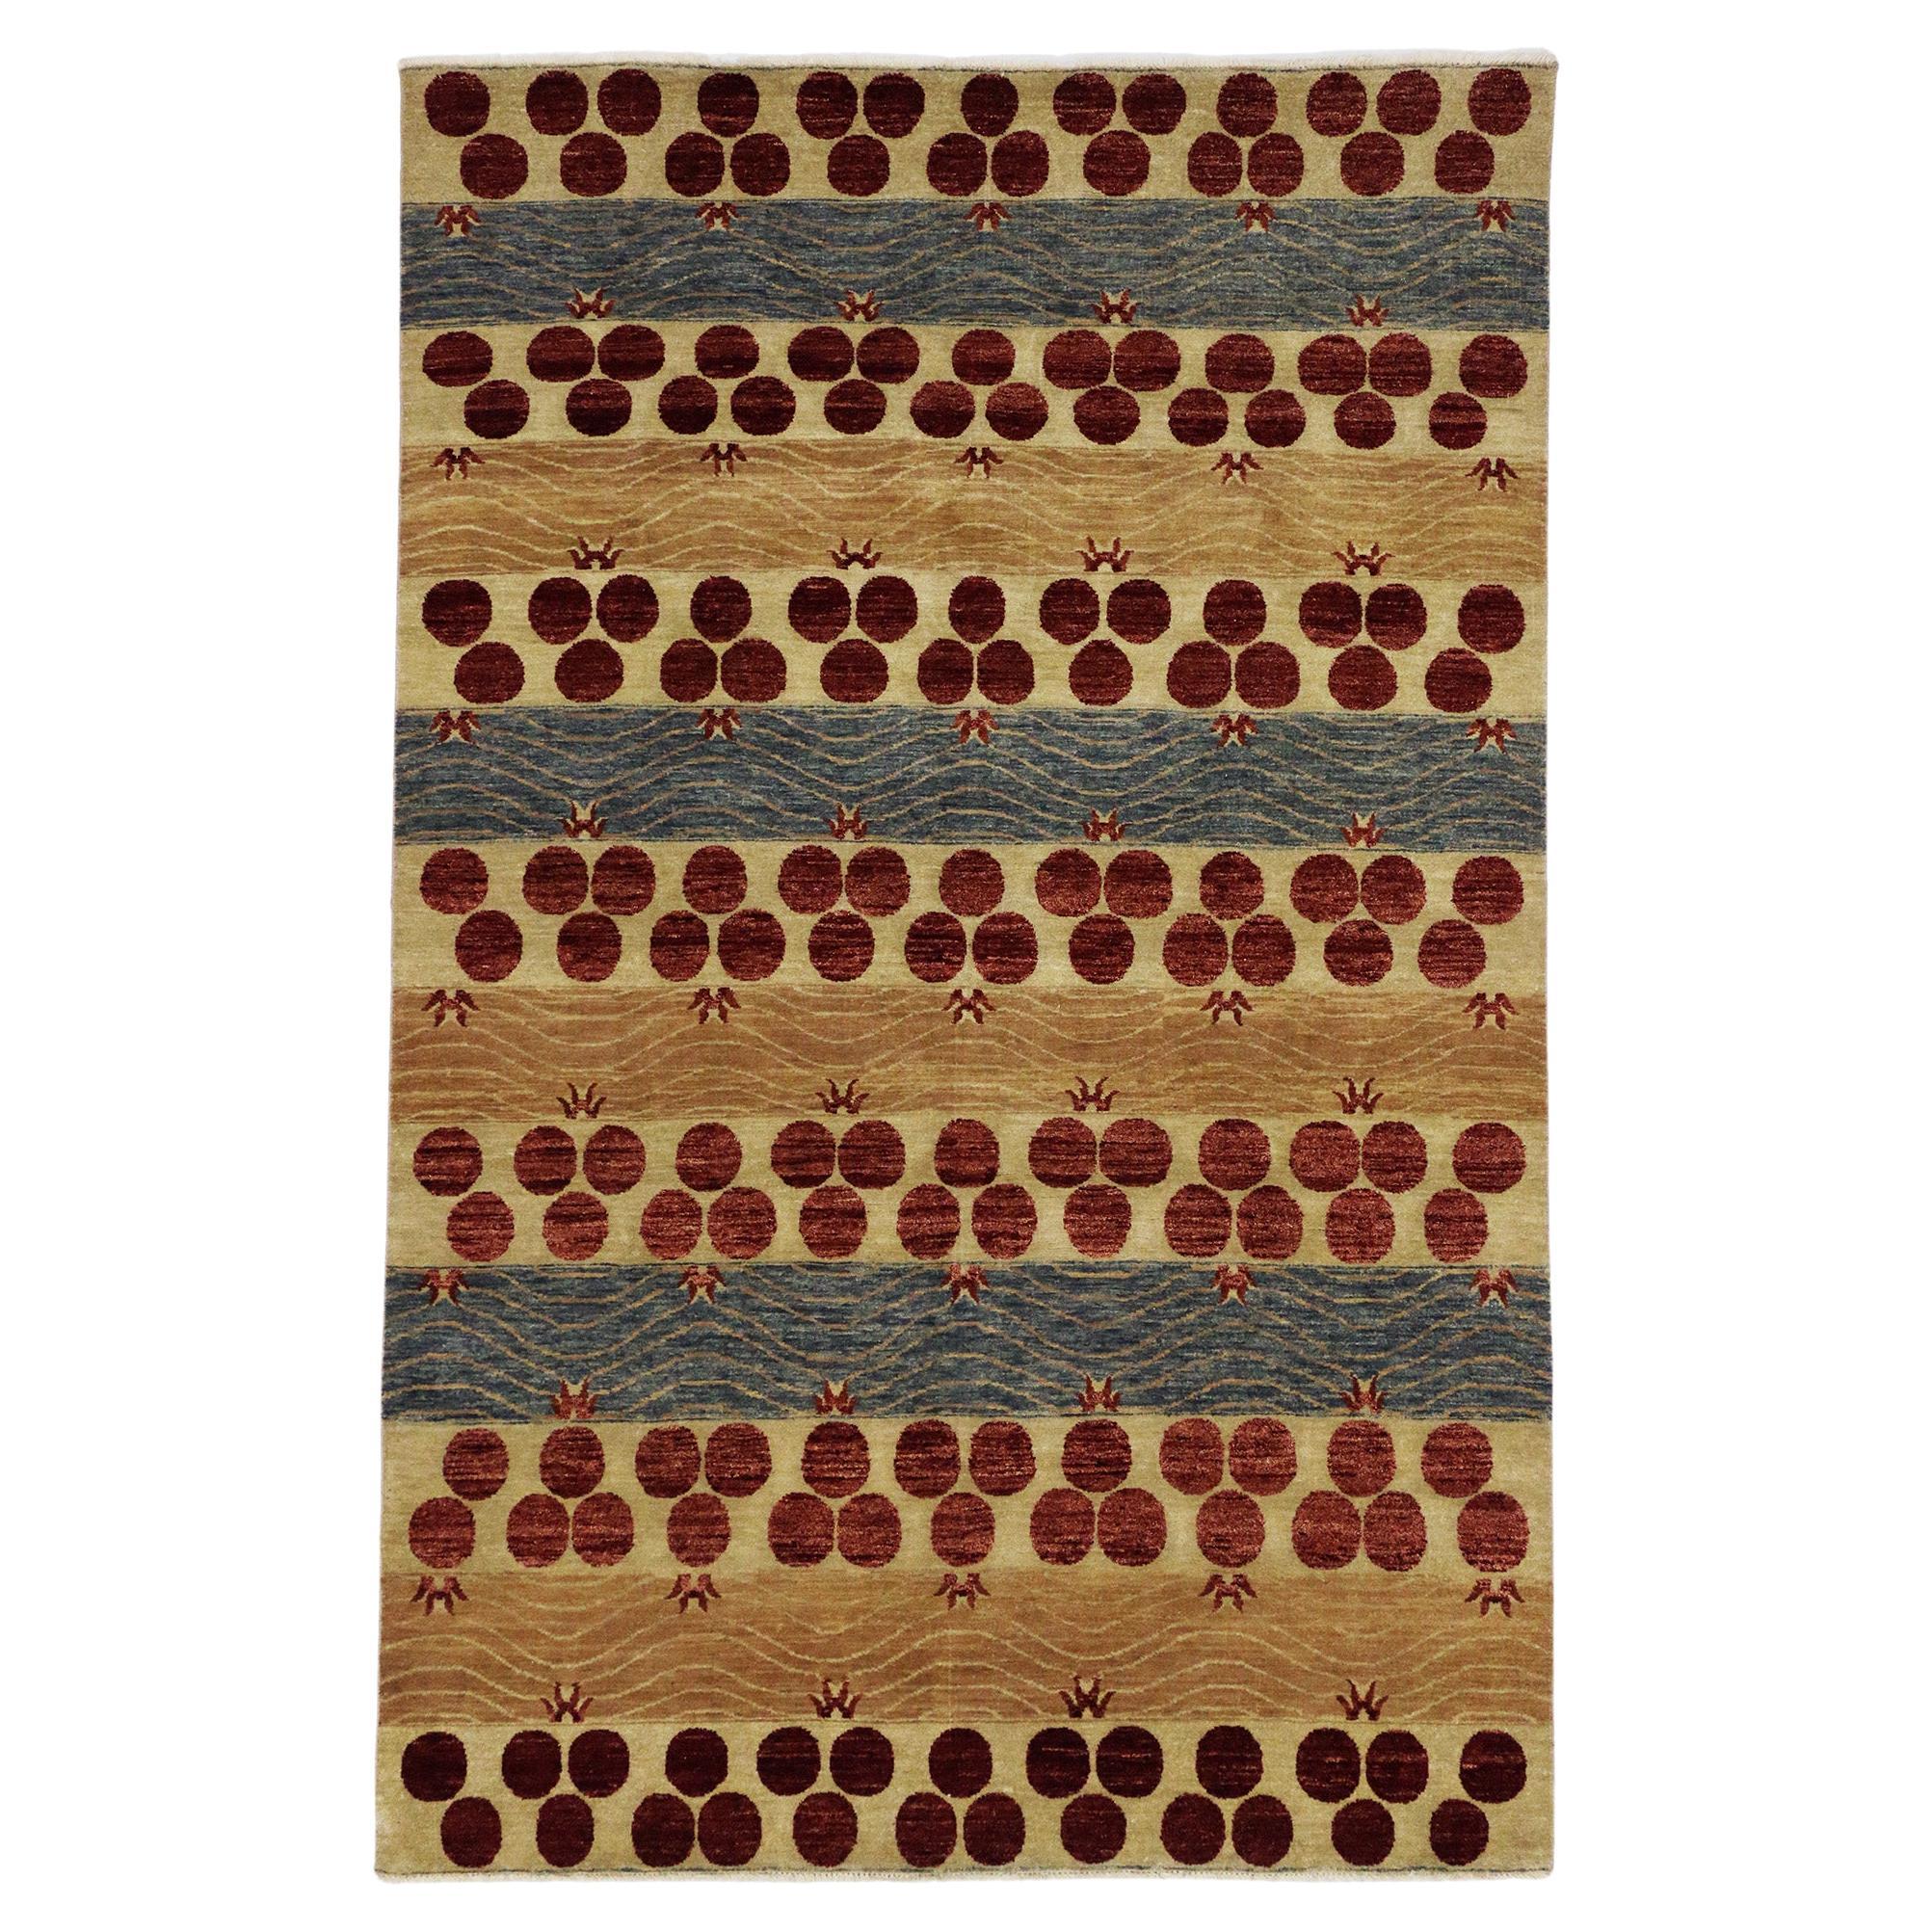 Transitional Indian Area Rug, Contemporary Elegance Meets Art Deco Style